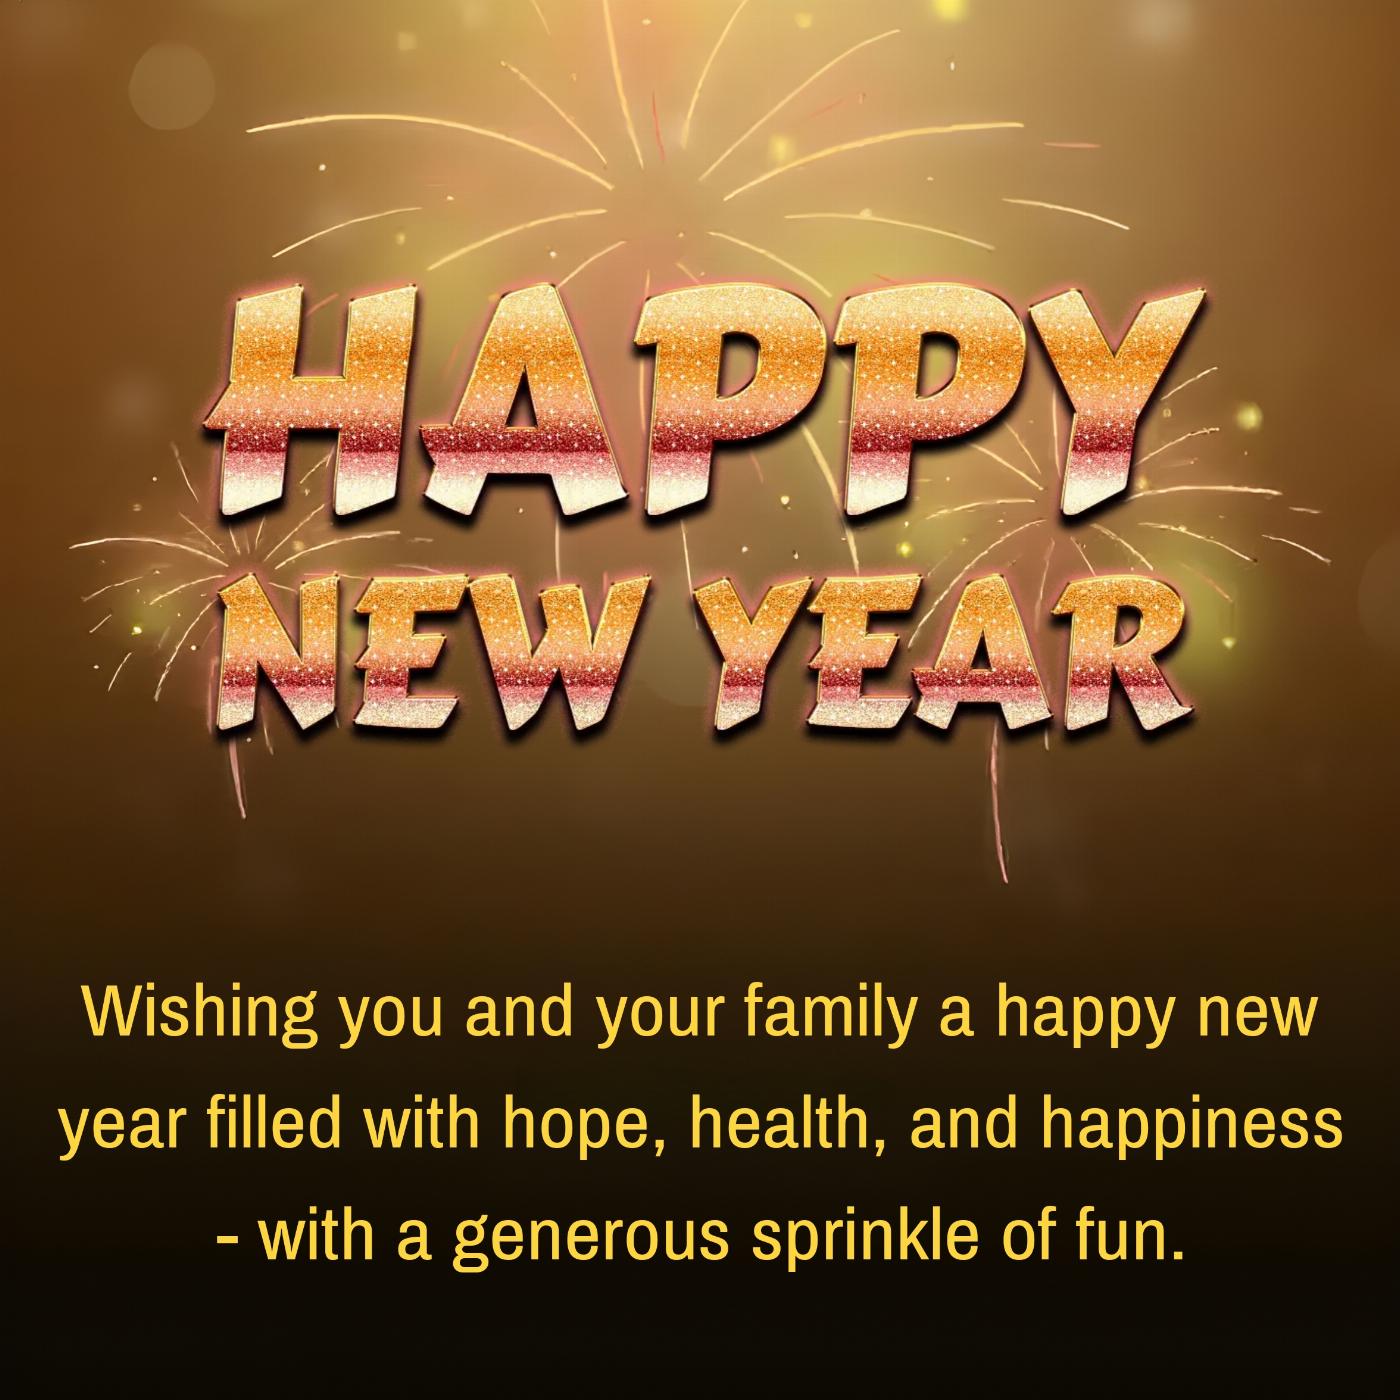 Wishing you and your family a happy new year